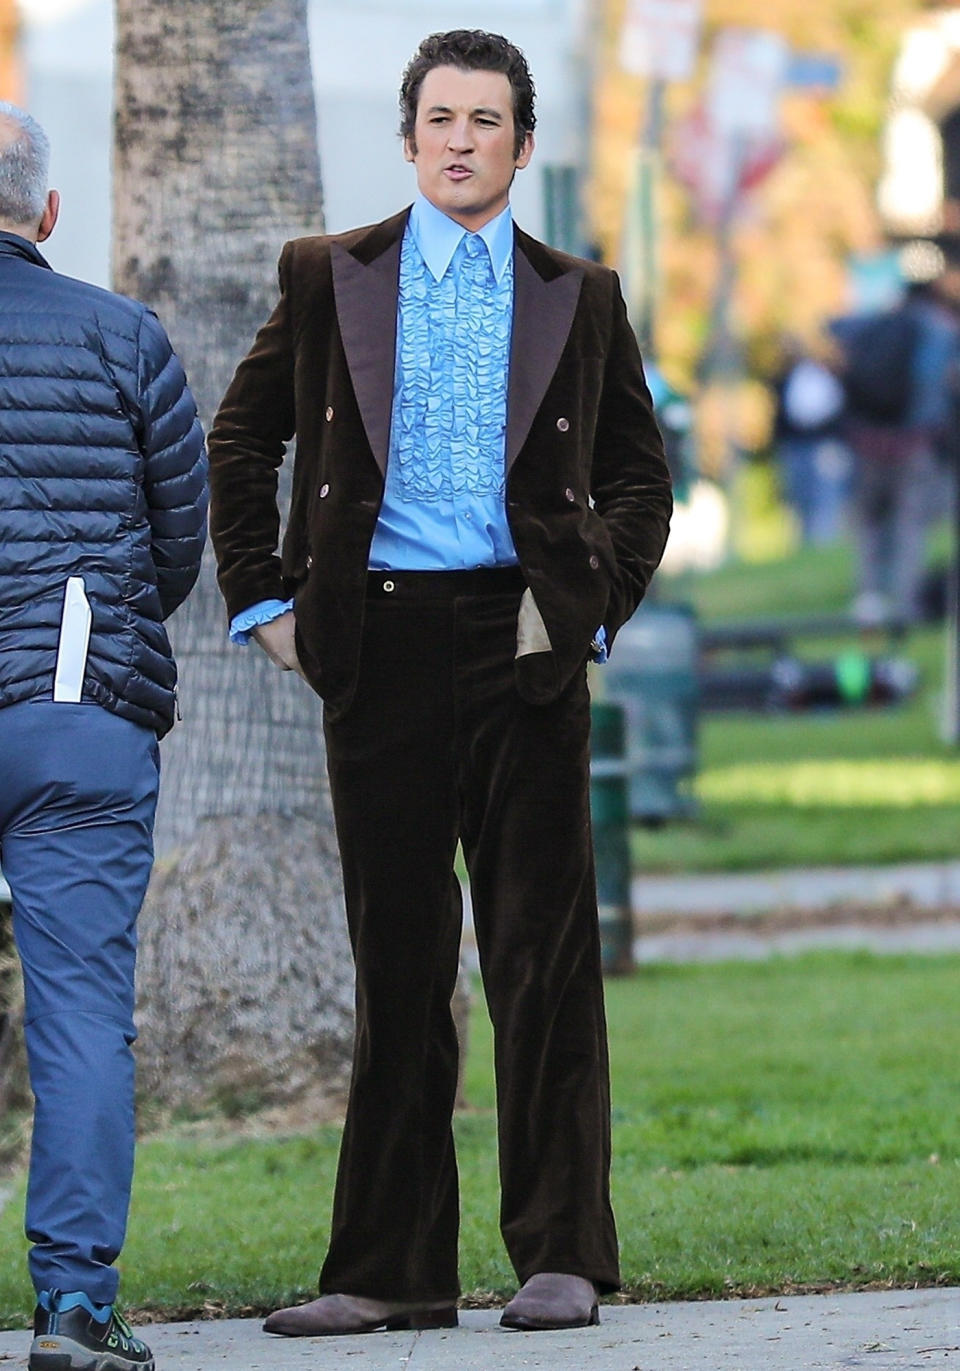 <p>Miles Teller is spotted in a retro look while filming a scene for <i>The Godfather </i>spinoff, <i>The Offer,</i> on Dec. 20 in Hollywood. </p>